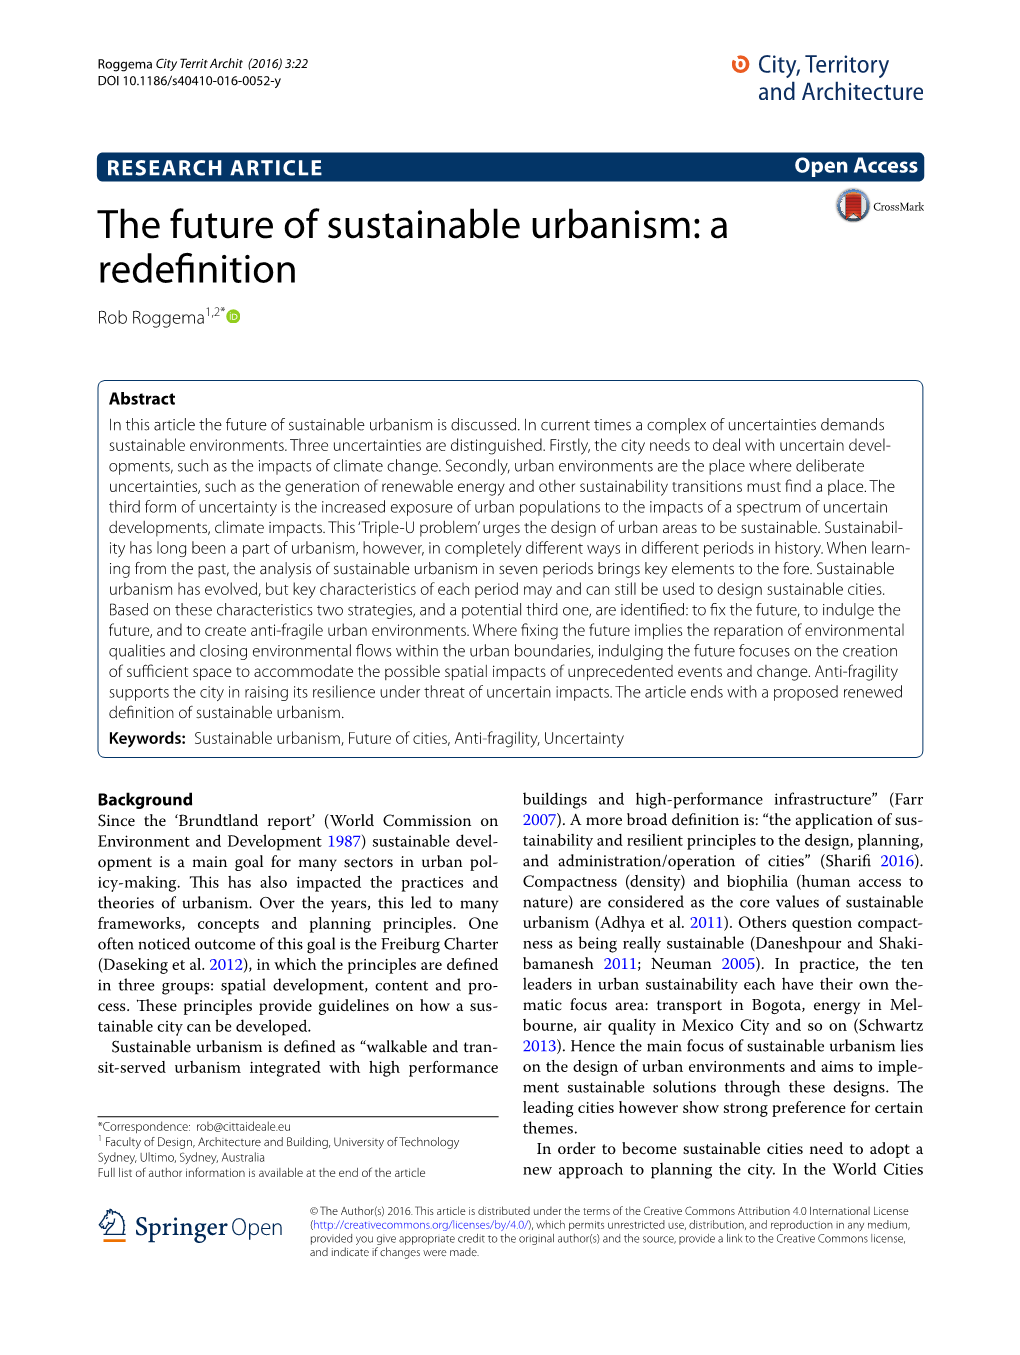 The Future of Sustainable Urbanism: a Redefinition Rob Roggema1,2*